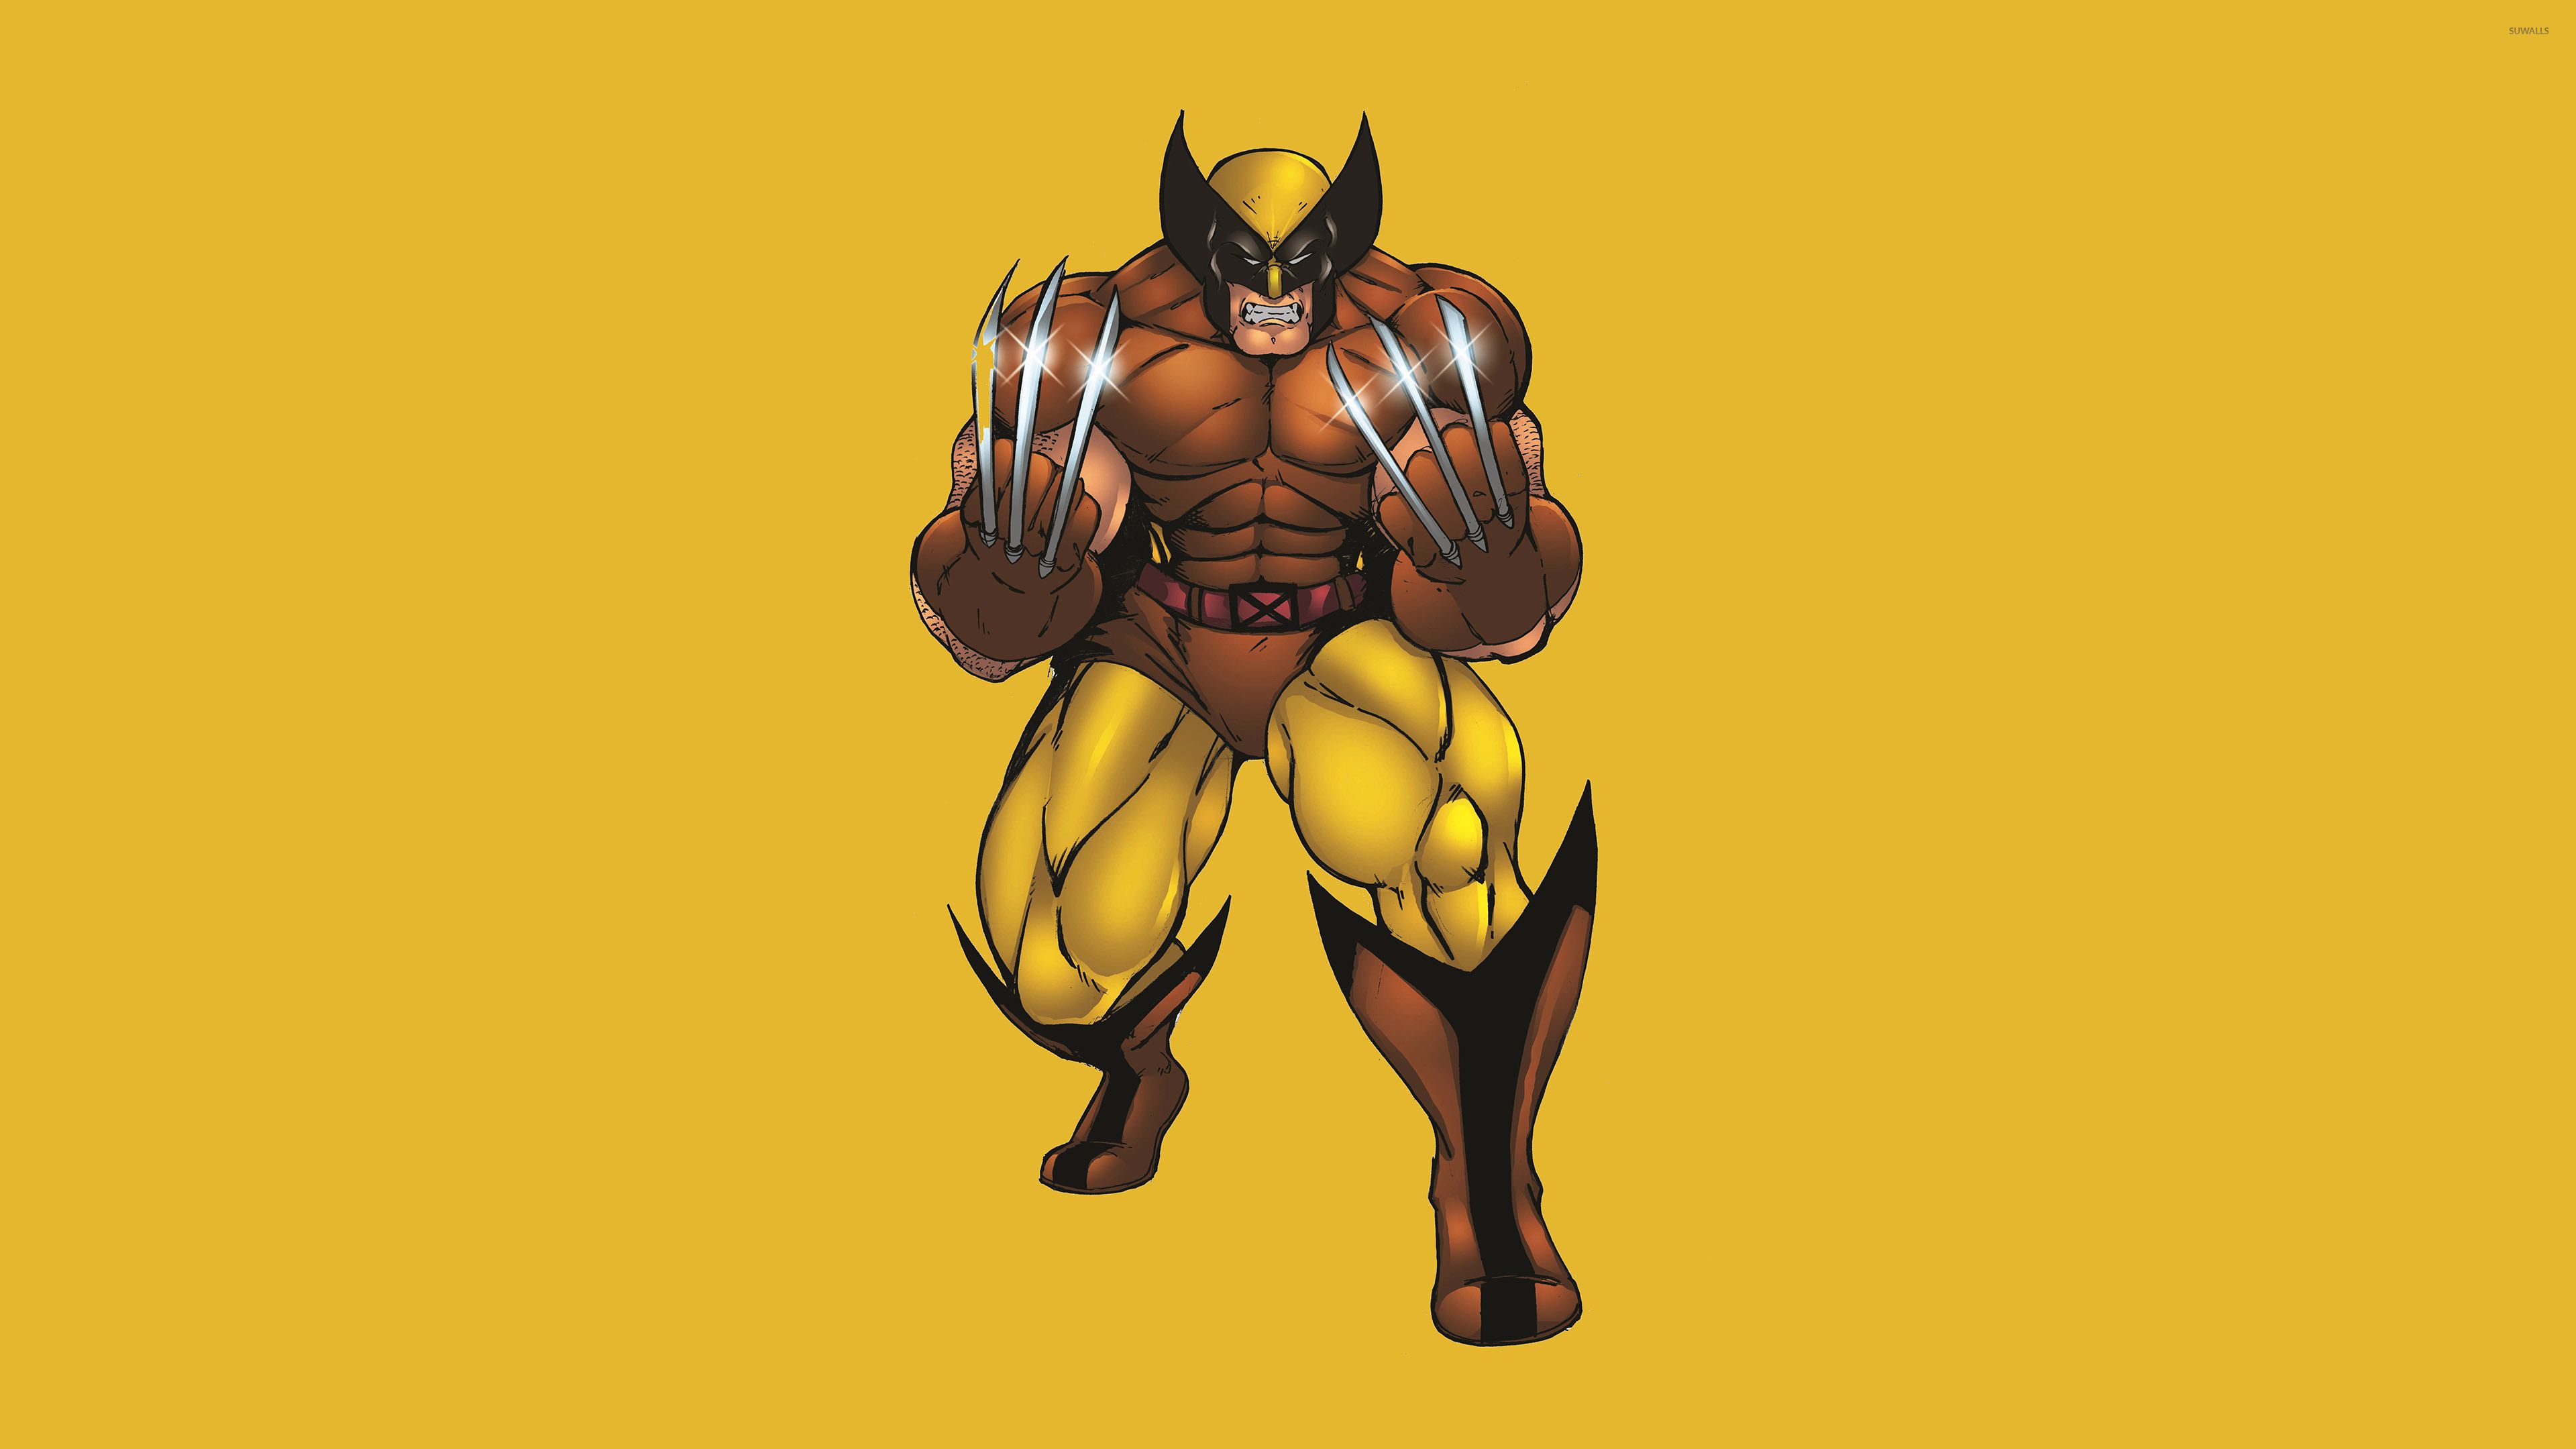 Wolverine with silver claws wallpaper wallpaper